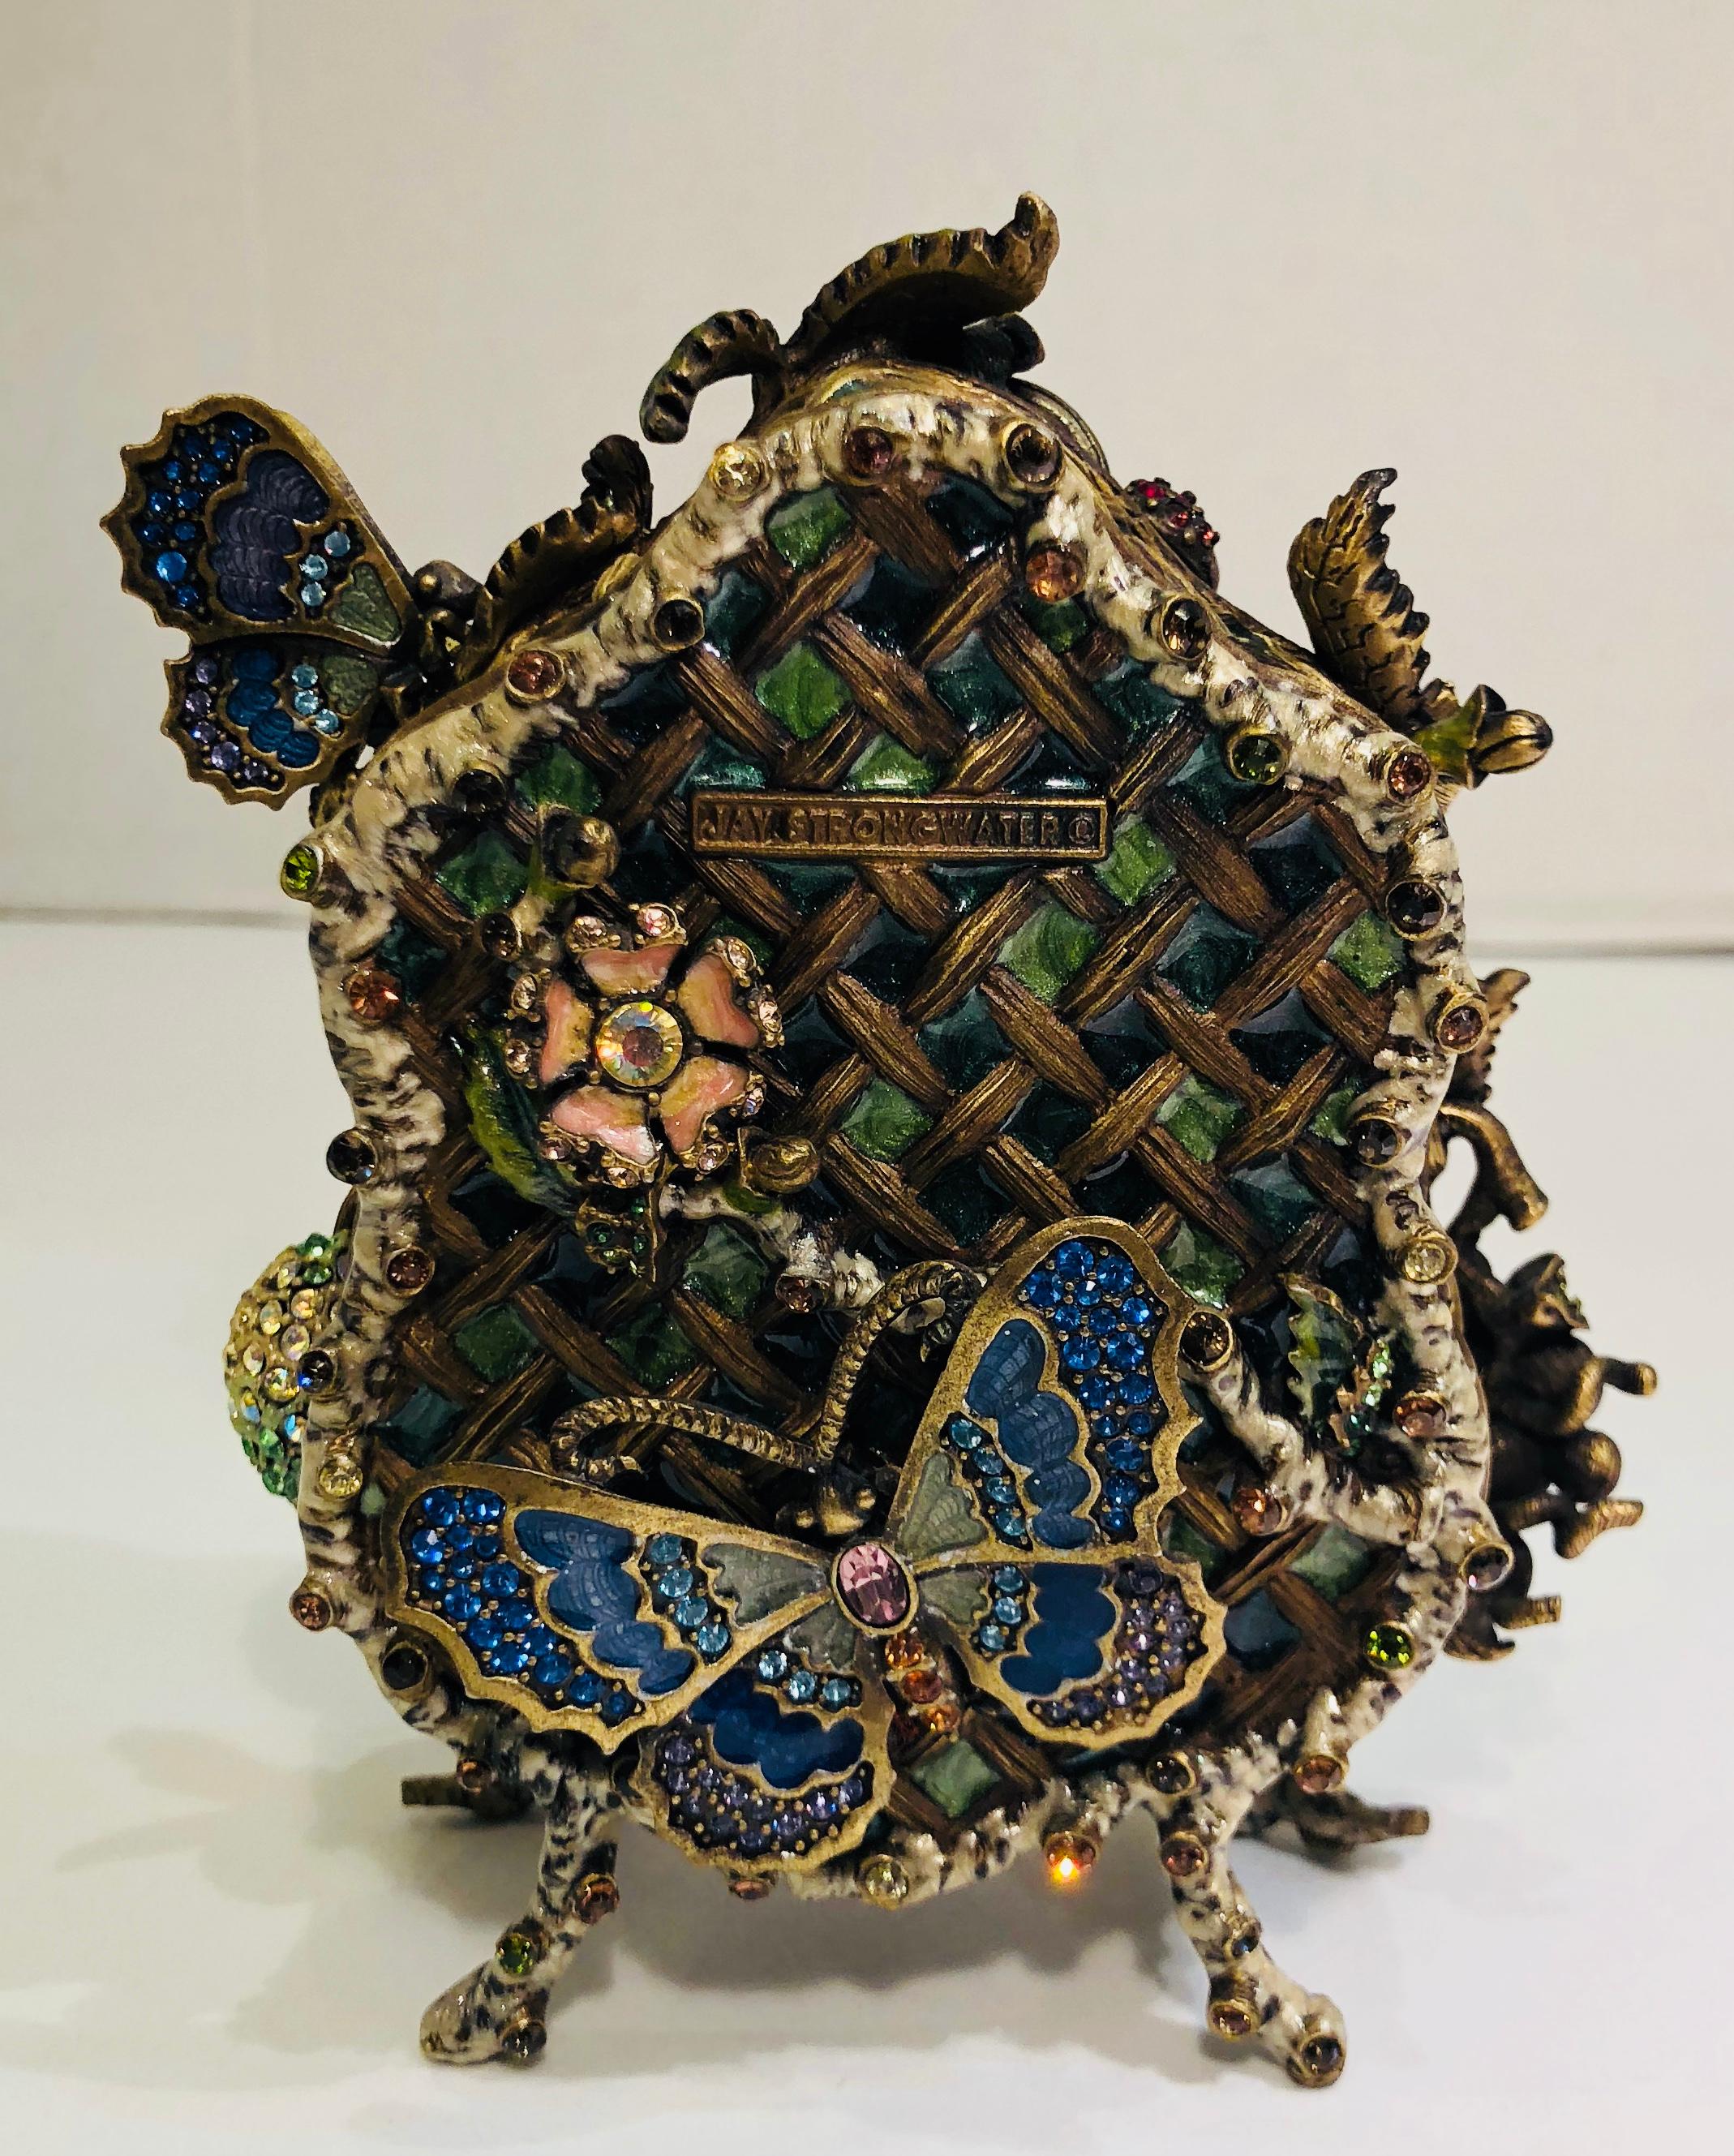 Rare, hard-to-find, estate, retired designer Jay Strongwater English Garden Fruit Trellis Clock for a desk, table or shelf. This gorgeous, handmade and hand painted cast metal enamel decorative clock features a beautifully textured lattice pattern,